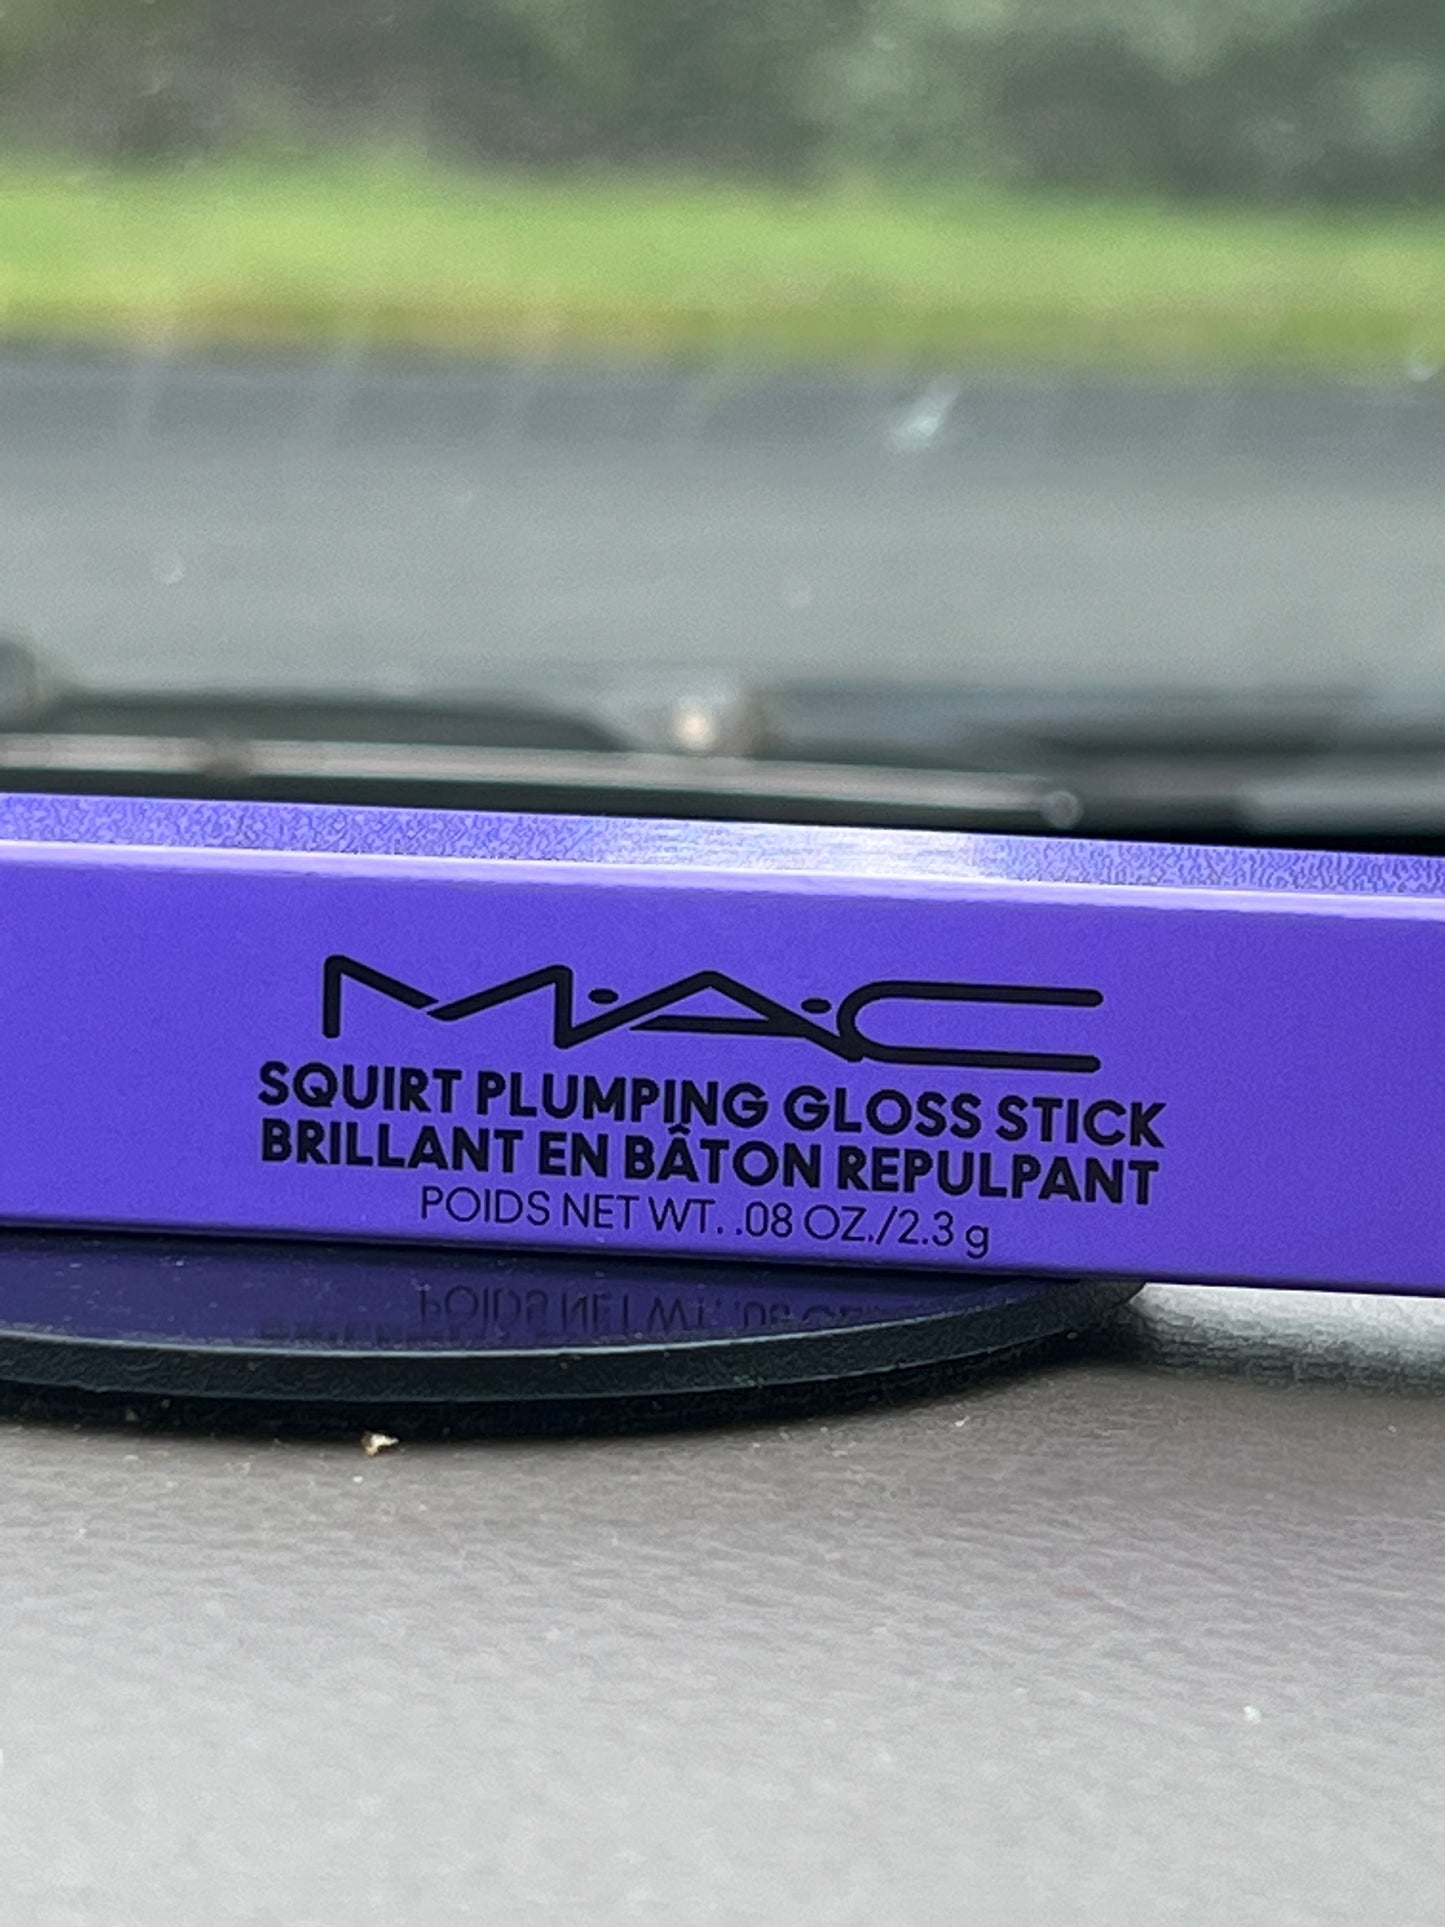 MAC Squirt Plumping Gloss Stick in Violet Beta